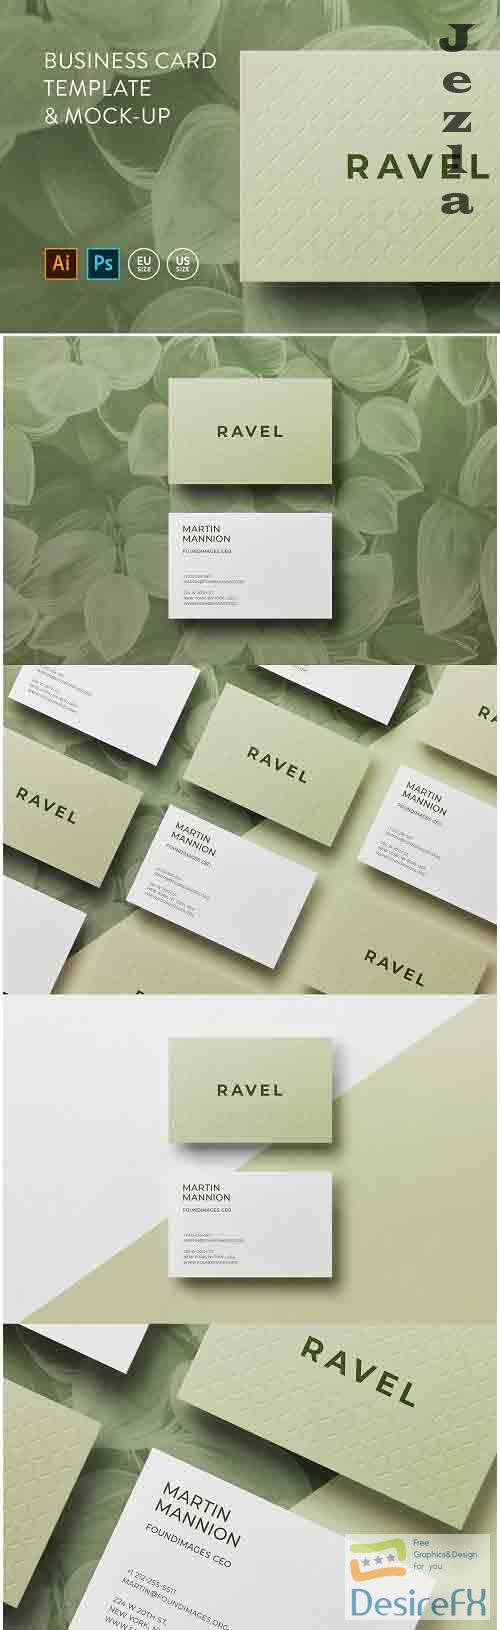 Business card Template & Mock-up #6 - 63941